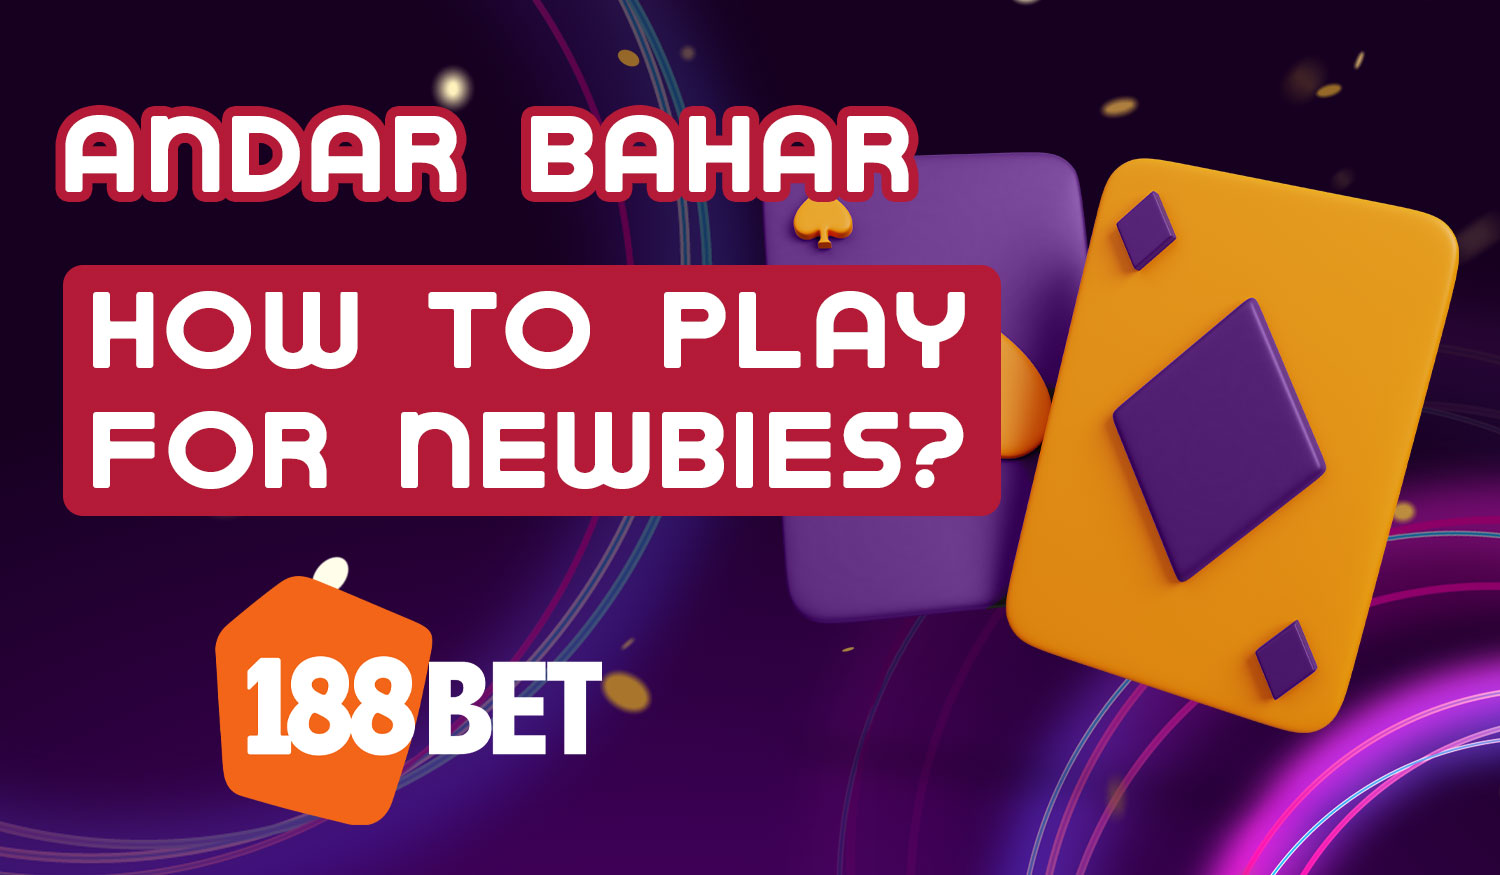 Comprehensive guide on how to play Andar Bahar for beginners on the 188Bet platform